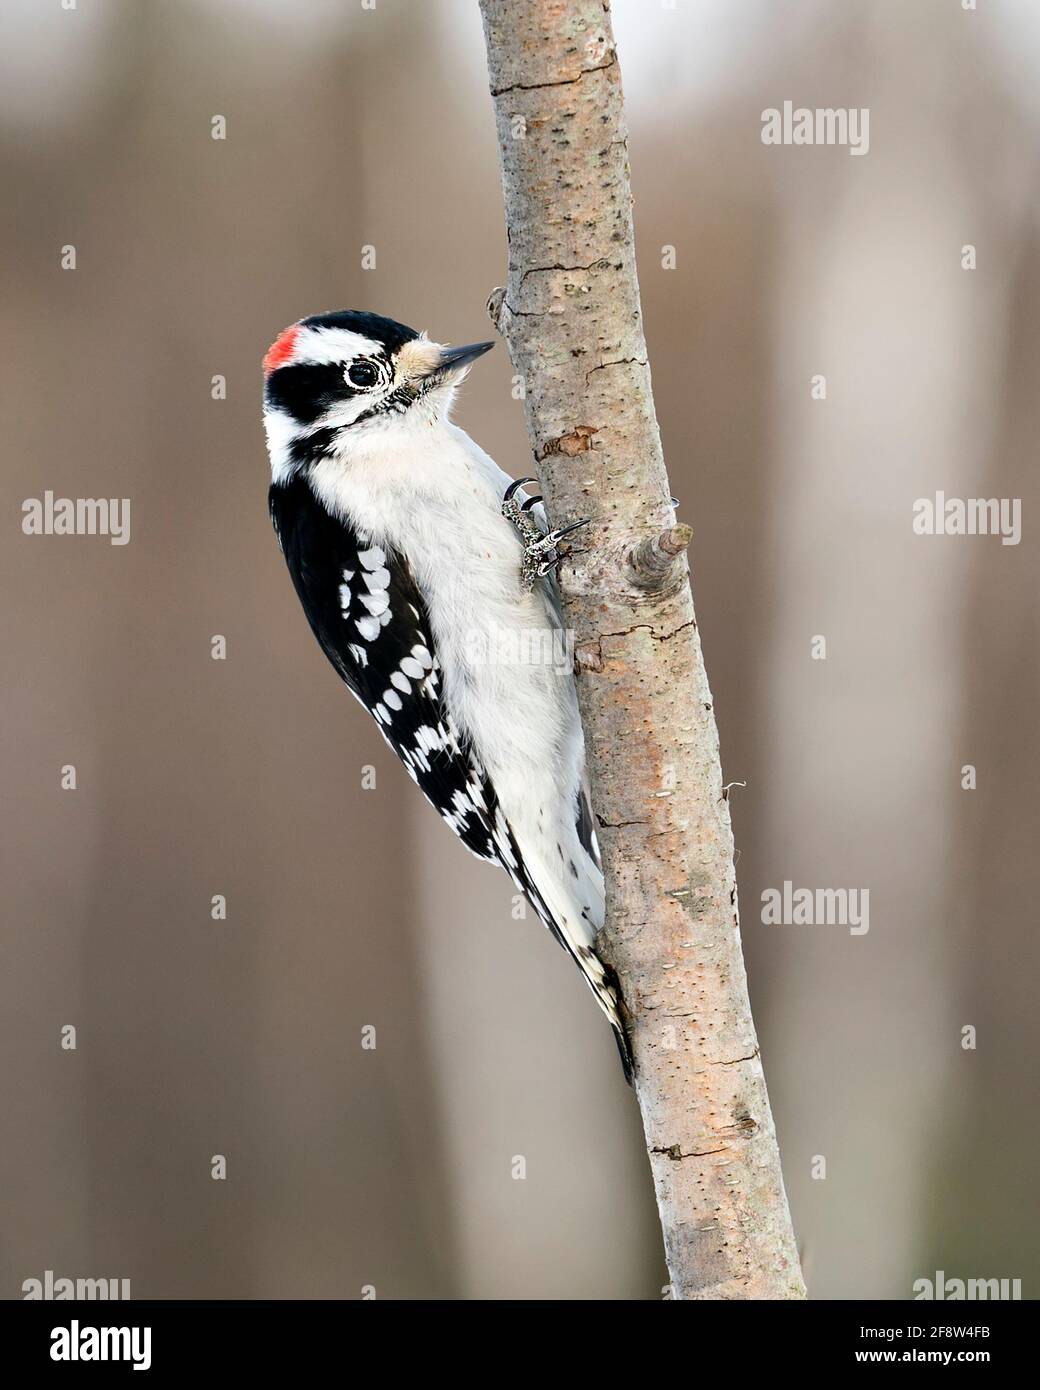 Woodpecker close-up profile view climbing tree branch and displaying feather plumage in its environment in the forest with a blur background. Image. Stock Photo